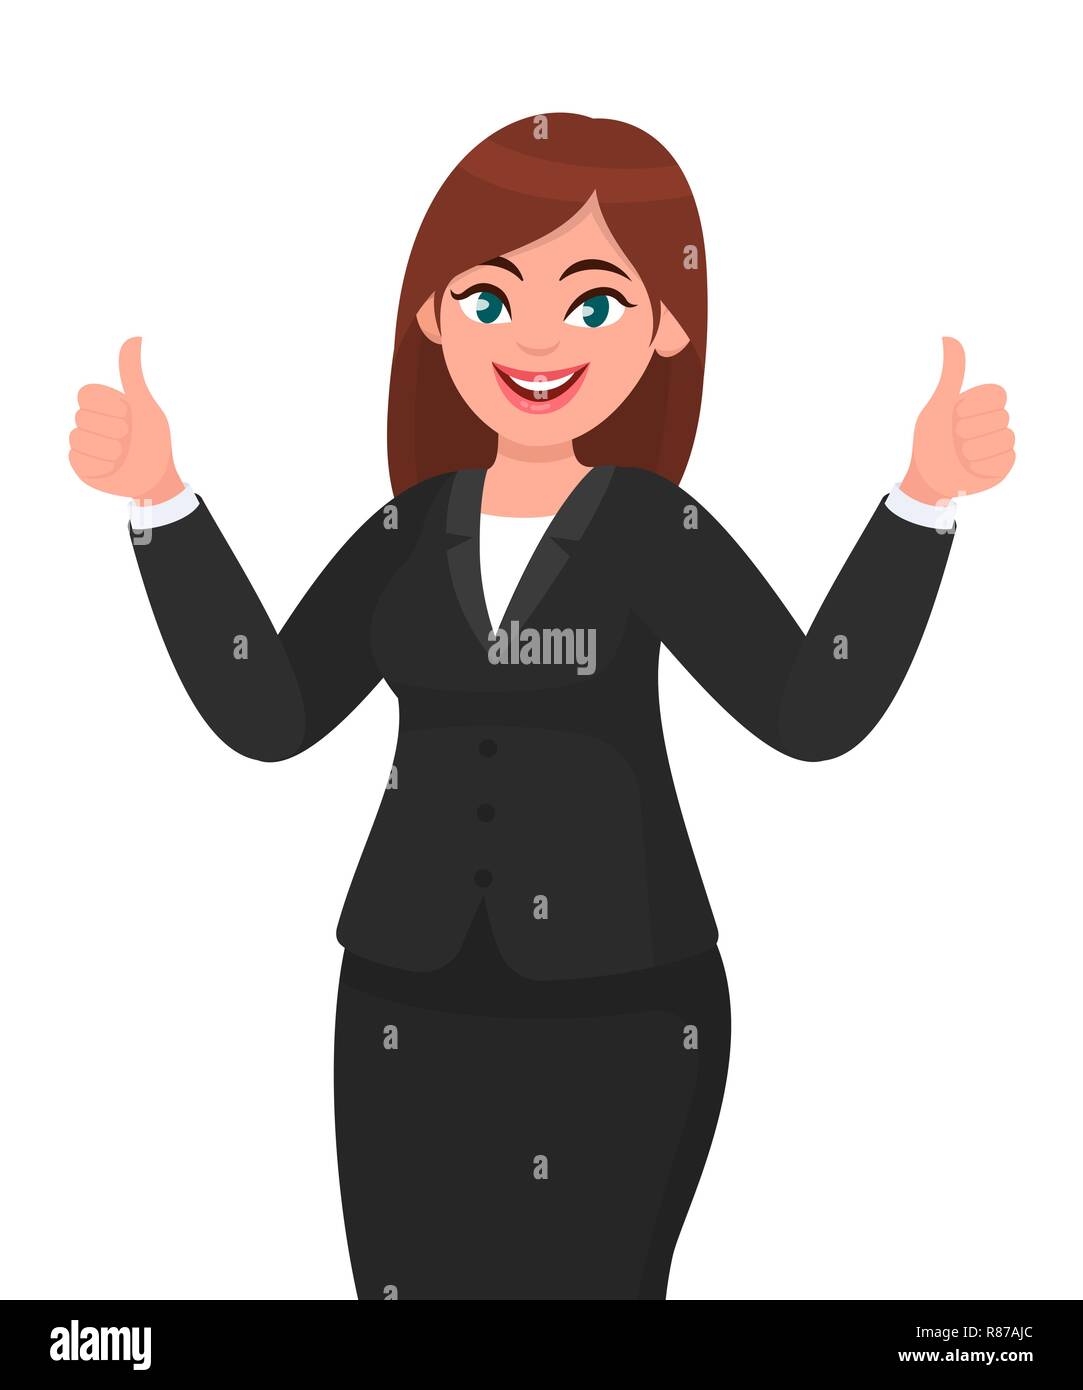 Beautiful smiling business woman showing thumbs up sign / gesturing with both hands. Like, agree, approve, positive concept illustration in vector Stock Vector